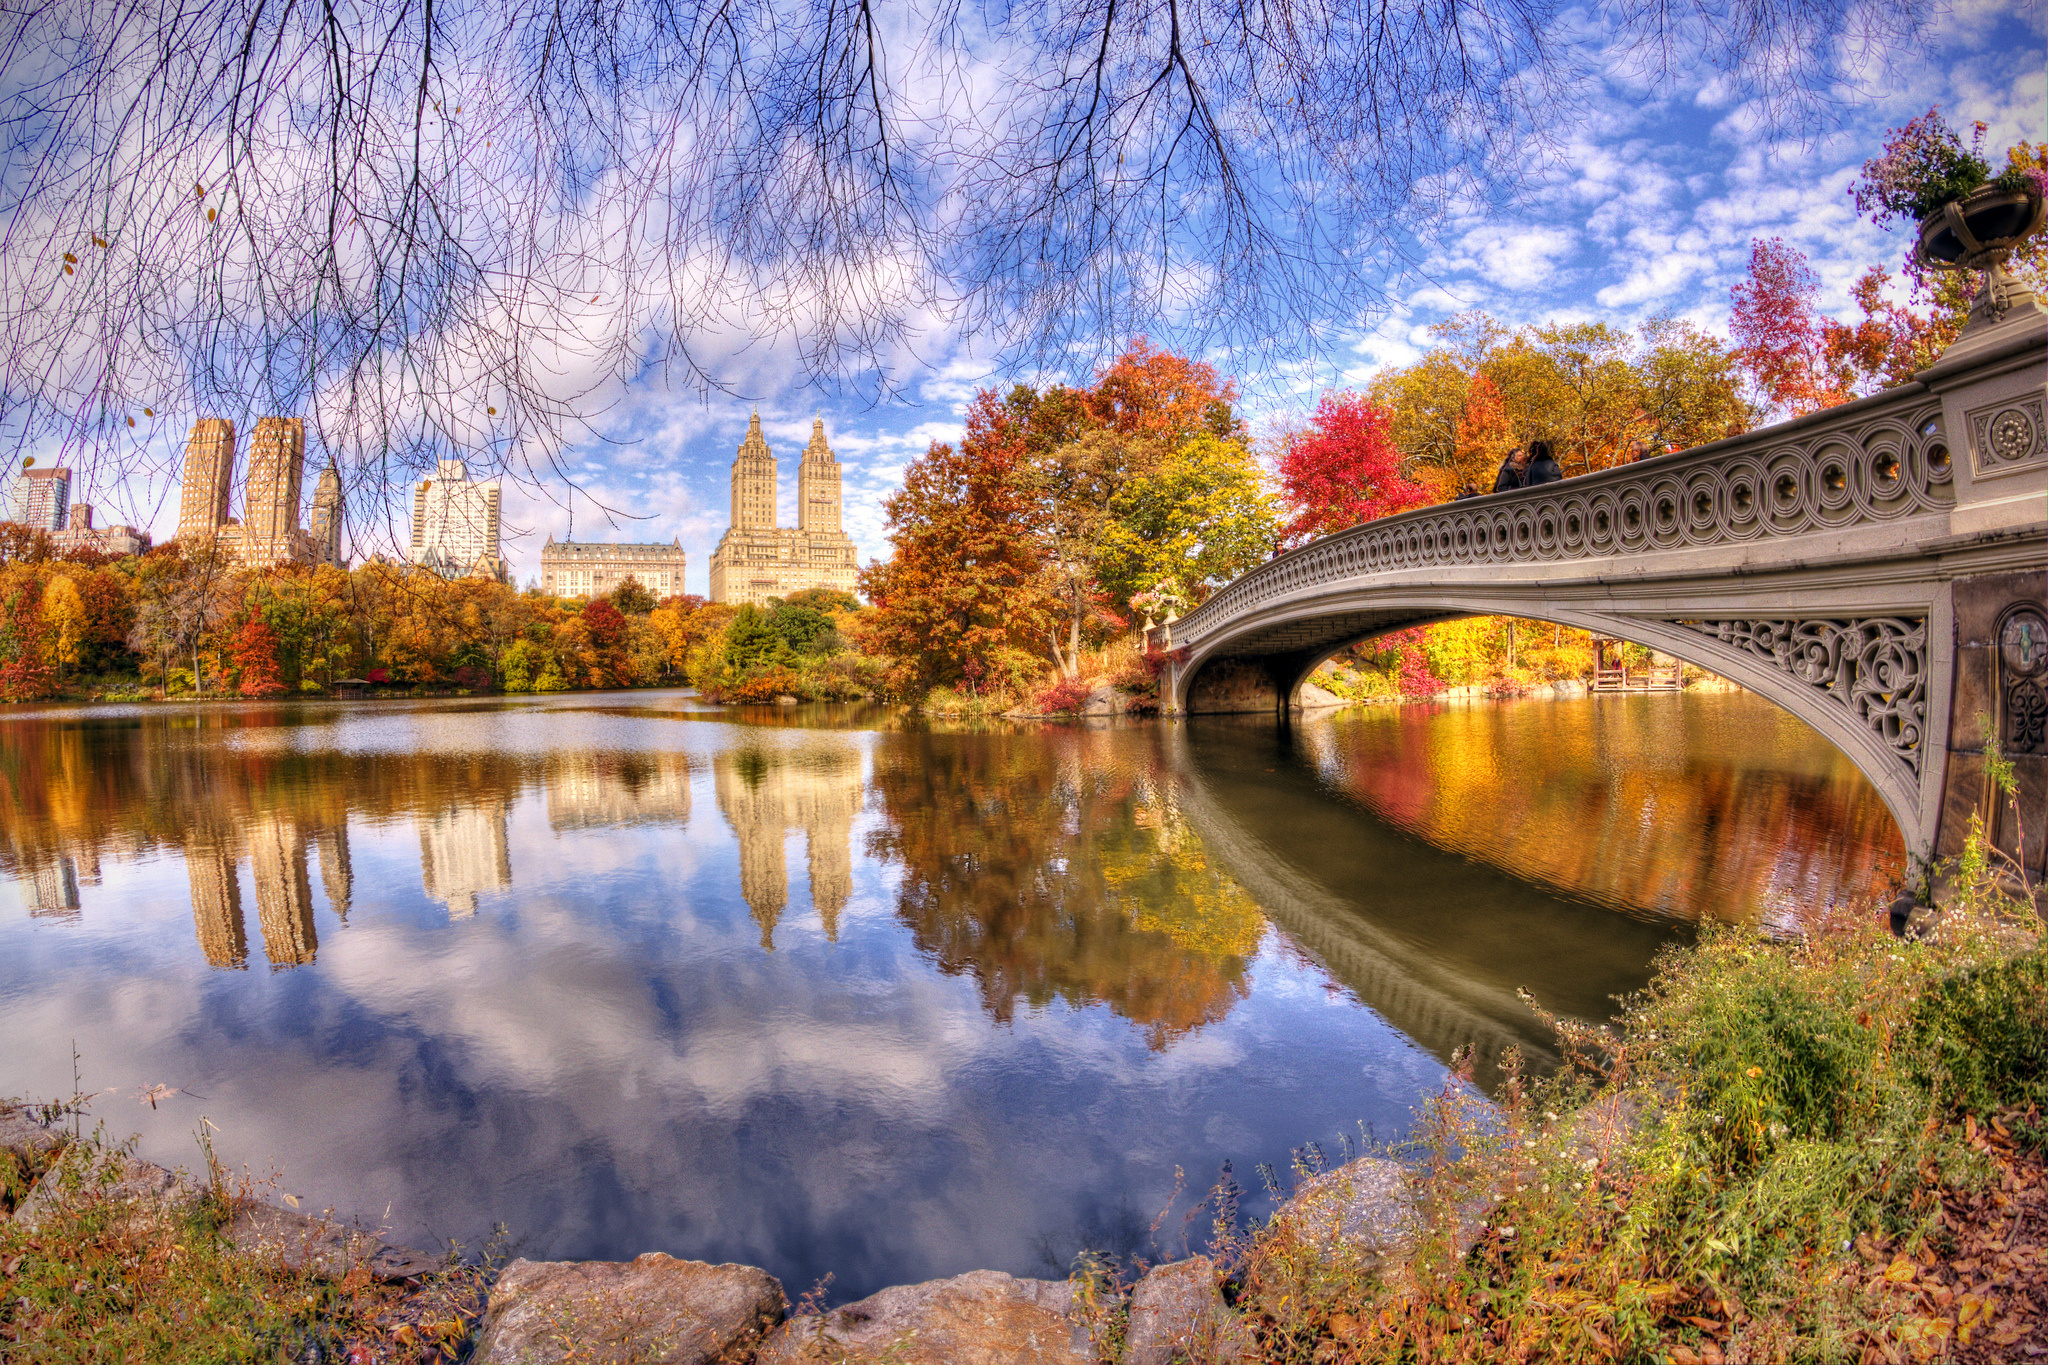 Central Park: New York's landmark, Bow Bridge stretching from Cherry Hill to the Ramble. 2050x1370 HD Background.